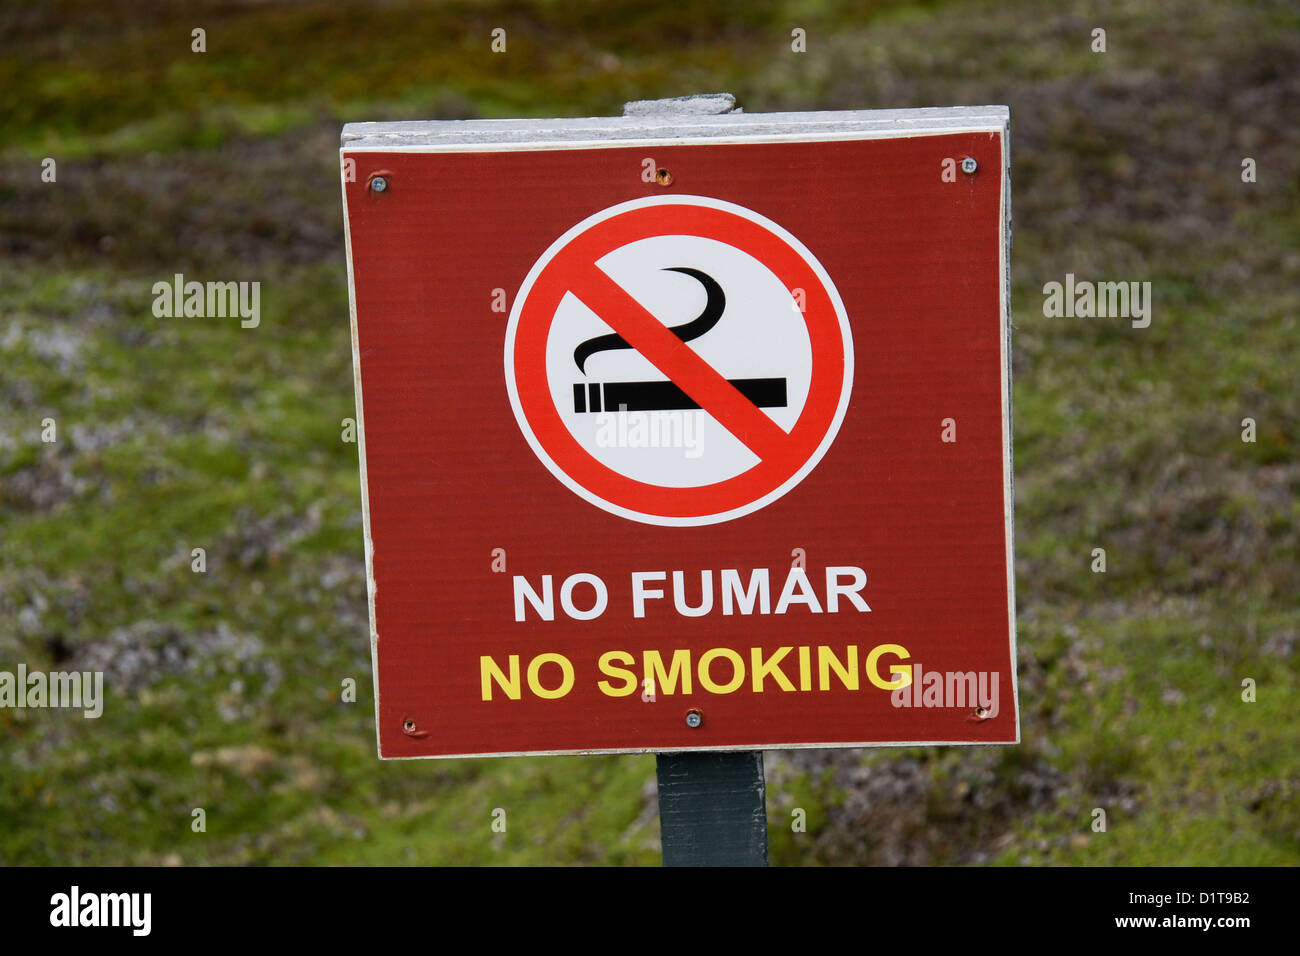 No Smoking sign in Spanish and English Stock Photo